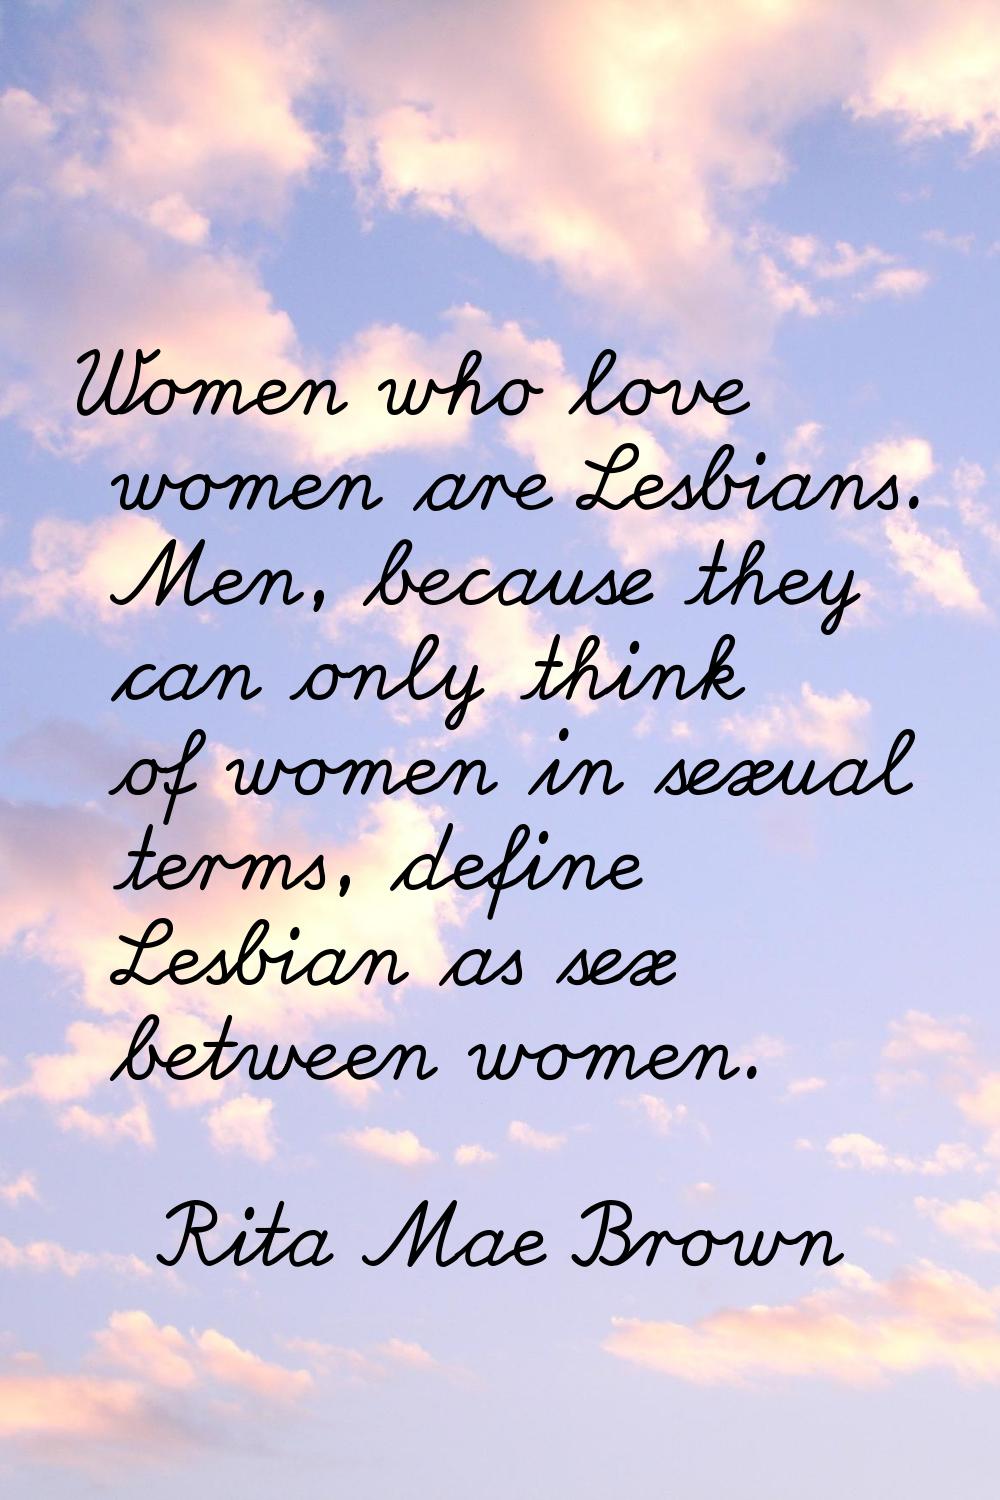 Women who love women are Lesbians. Men, because they can only think of women in sexual terms, defin